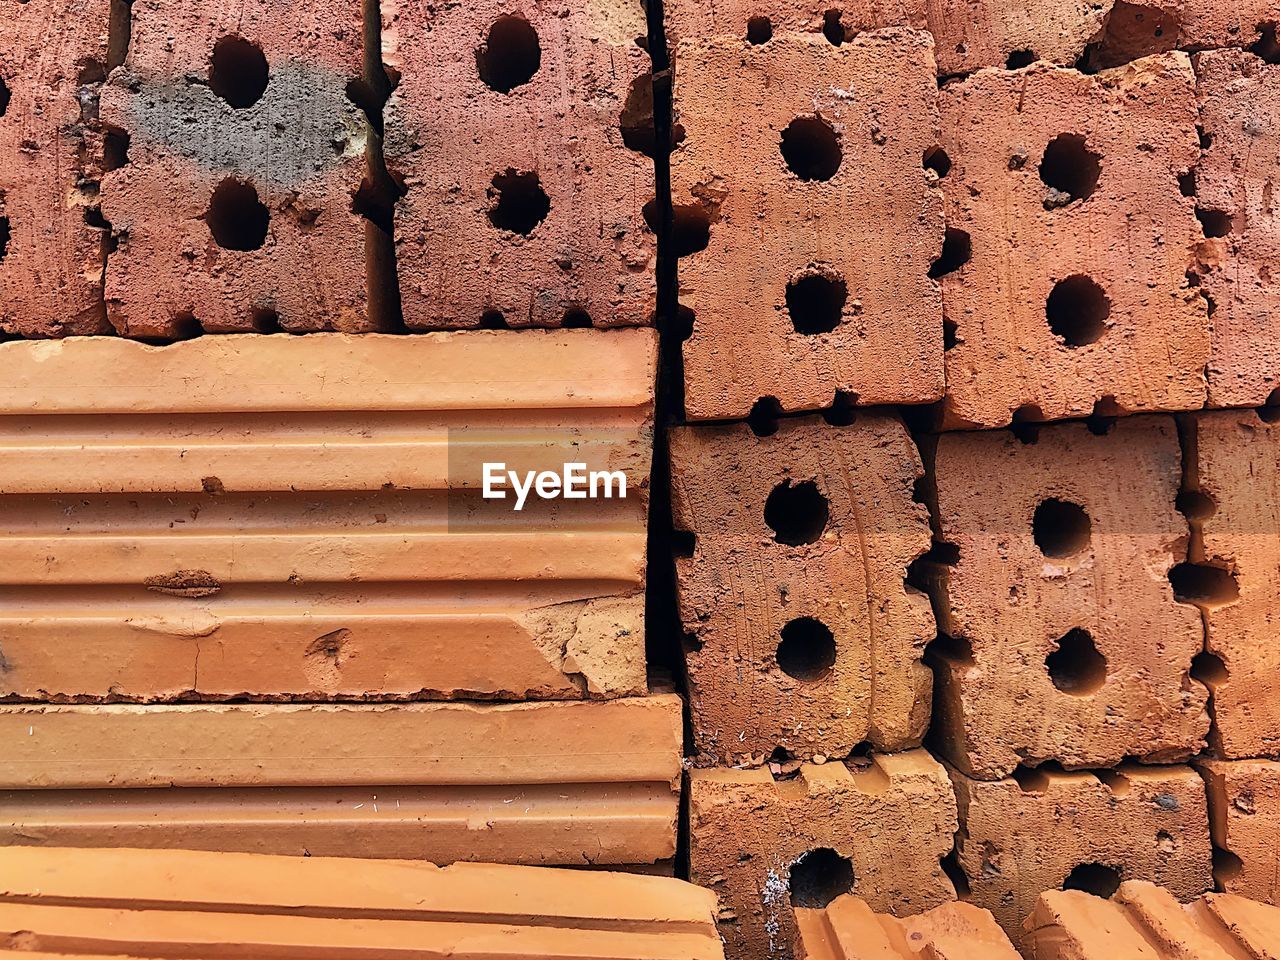 FULL FRAME SHOT OF RUSTY METAL WITH HOLES